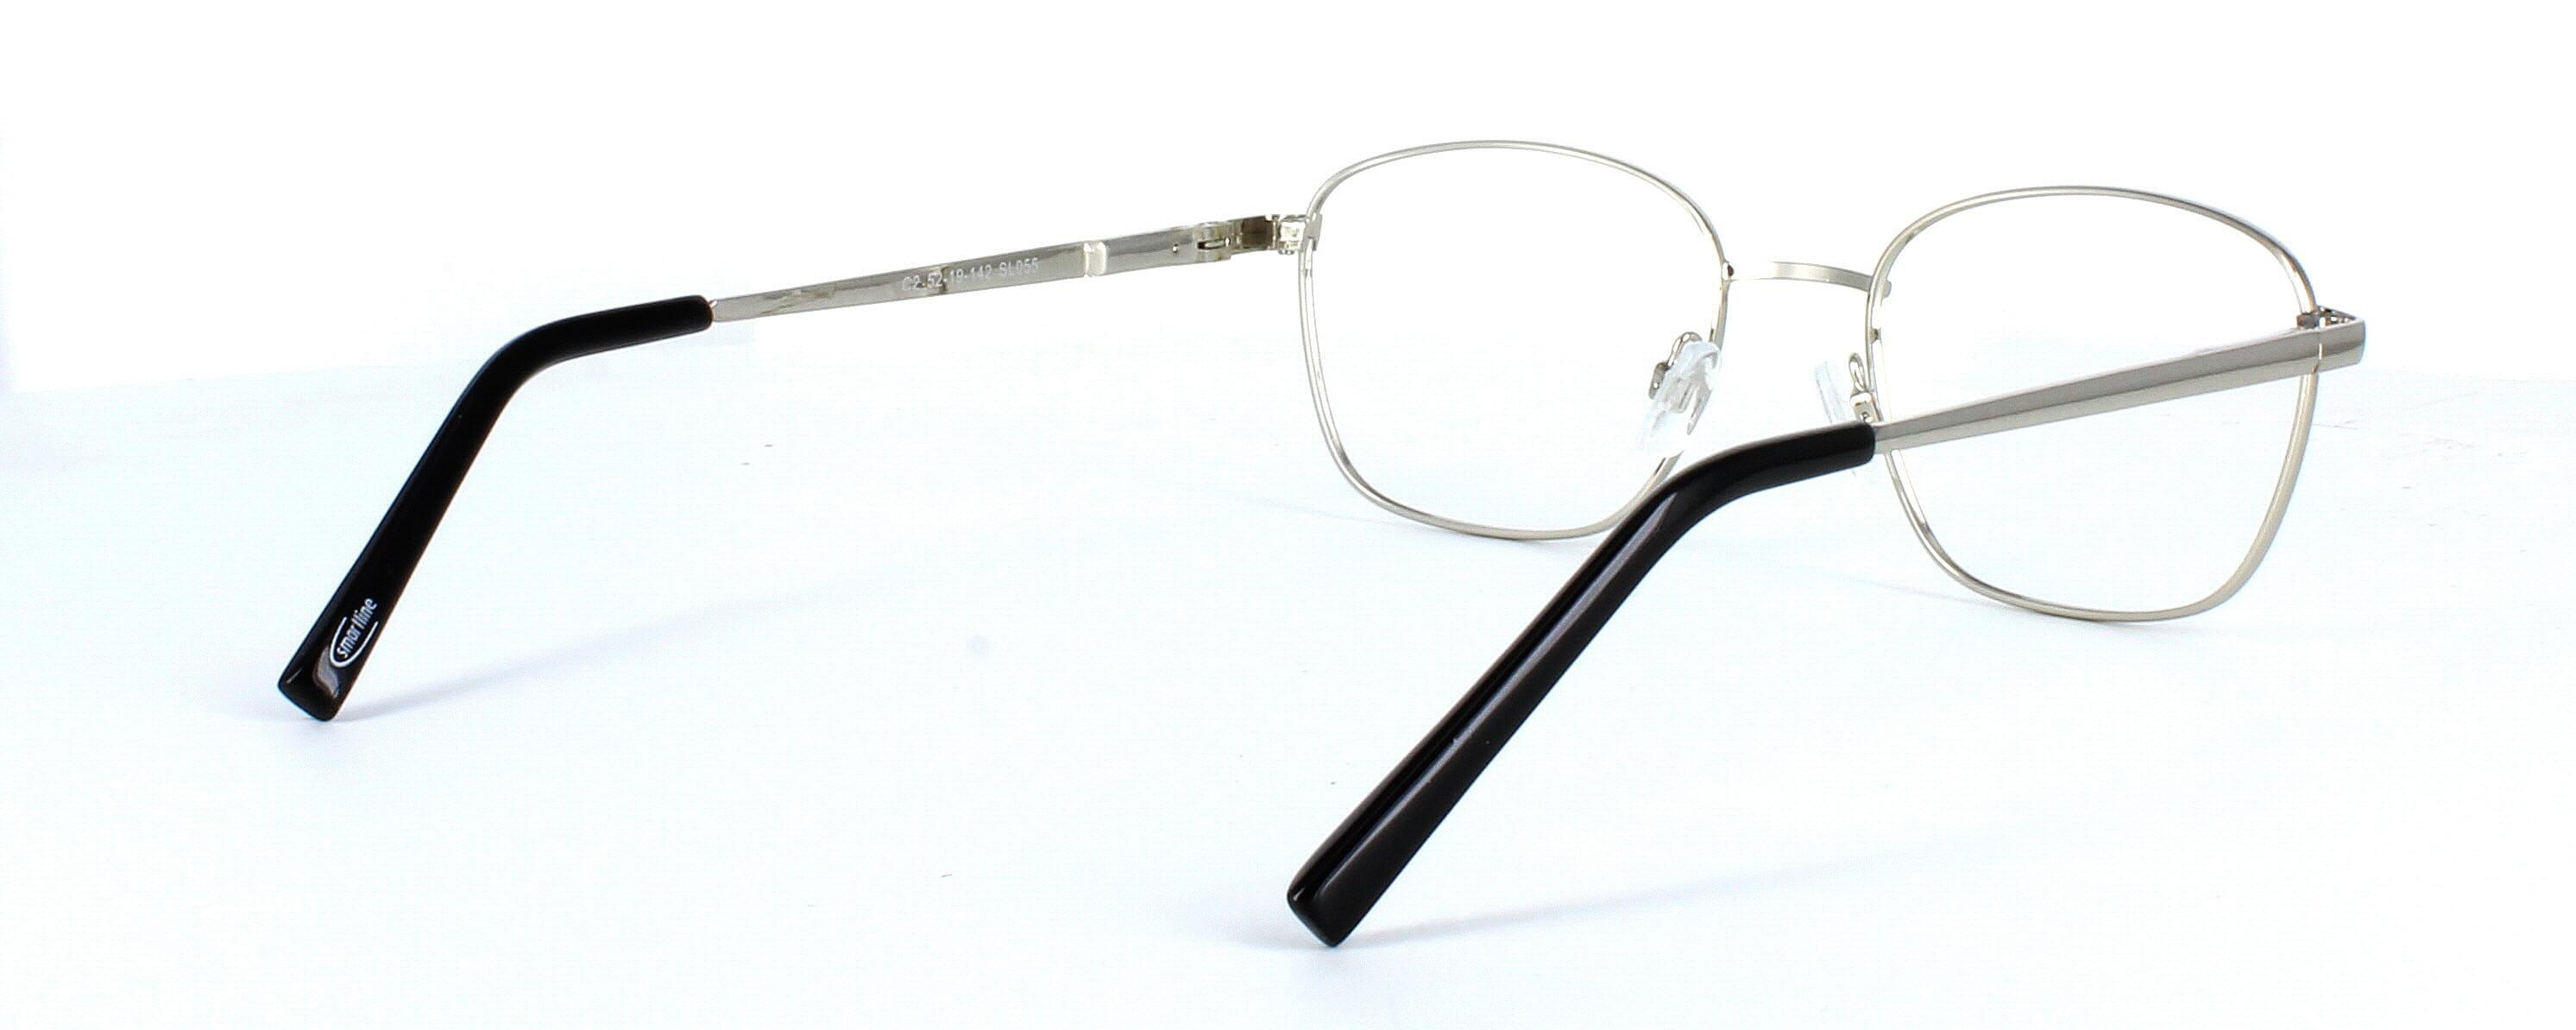 Blanko - Unisex shiny silver metal square shaped glasses with sprung hinge temple - image view 5